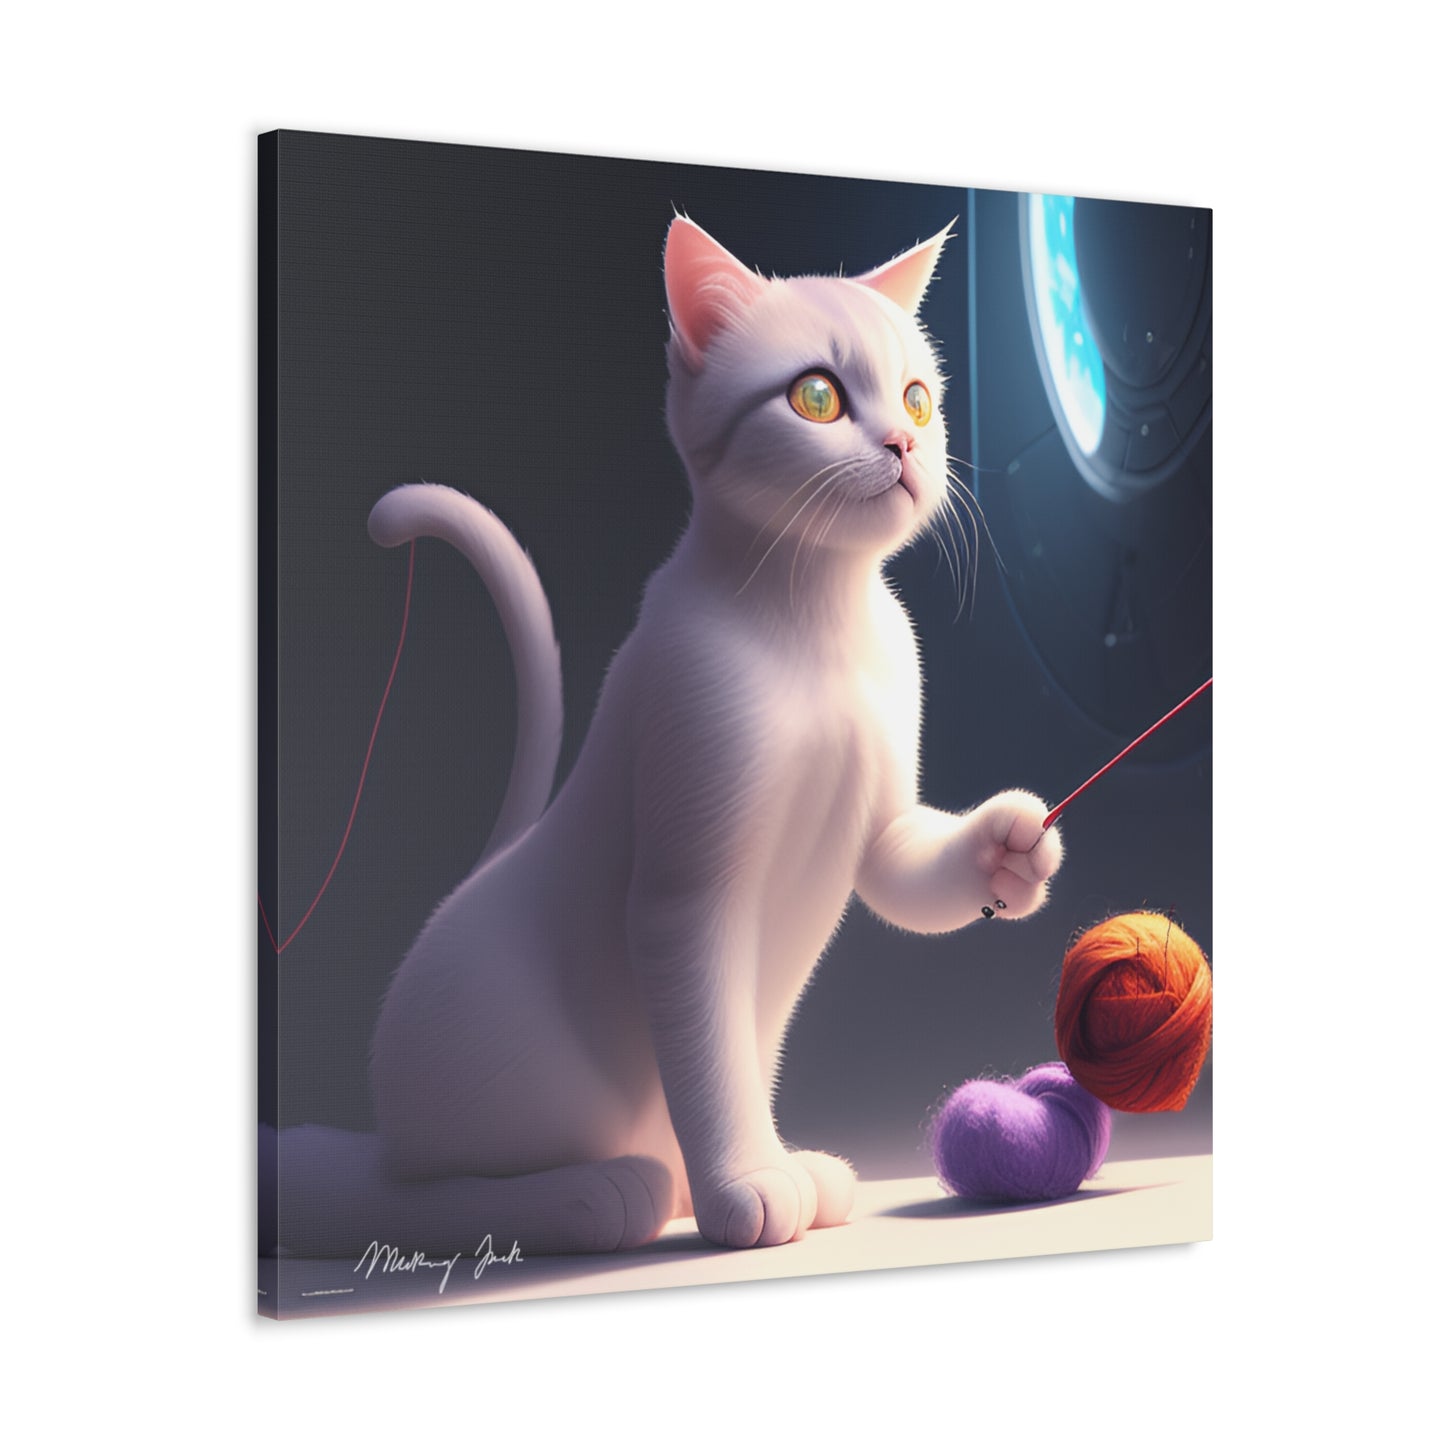 Playful Kitten and Wool Canvas Gallery Wraps